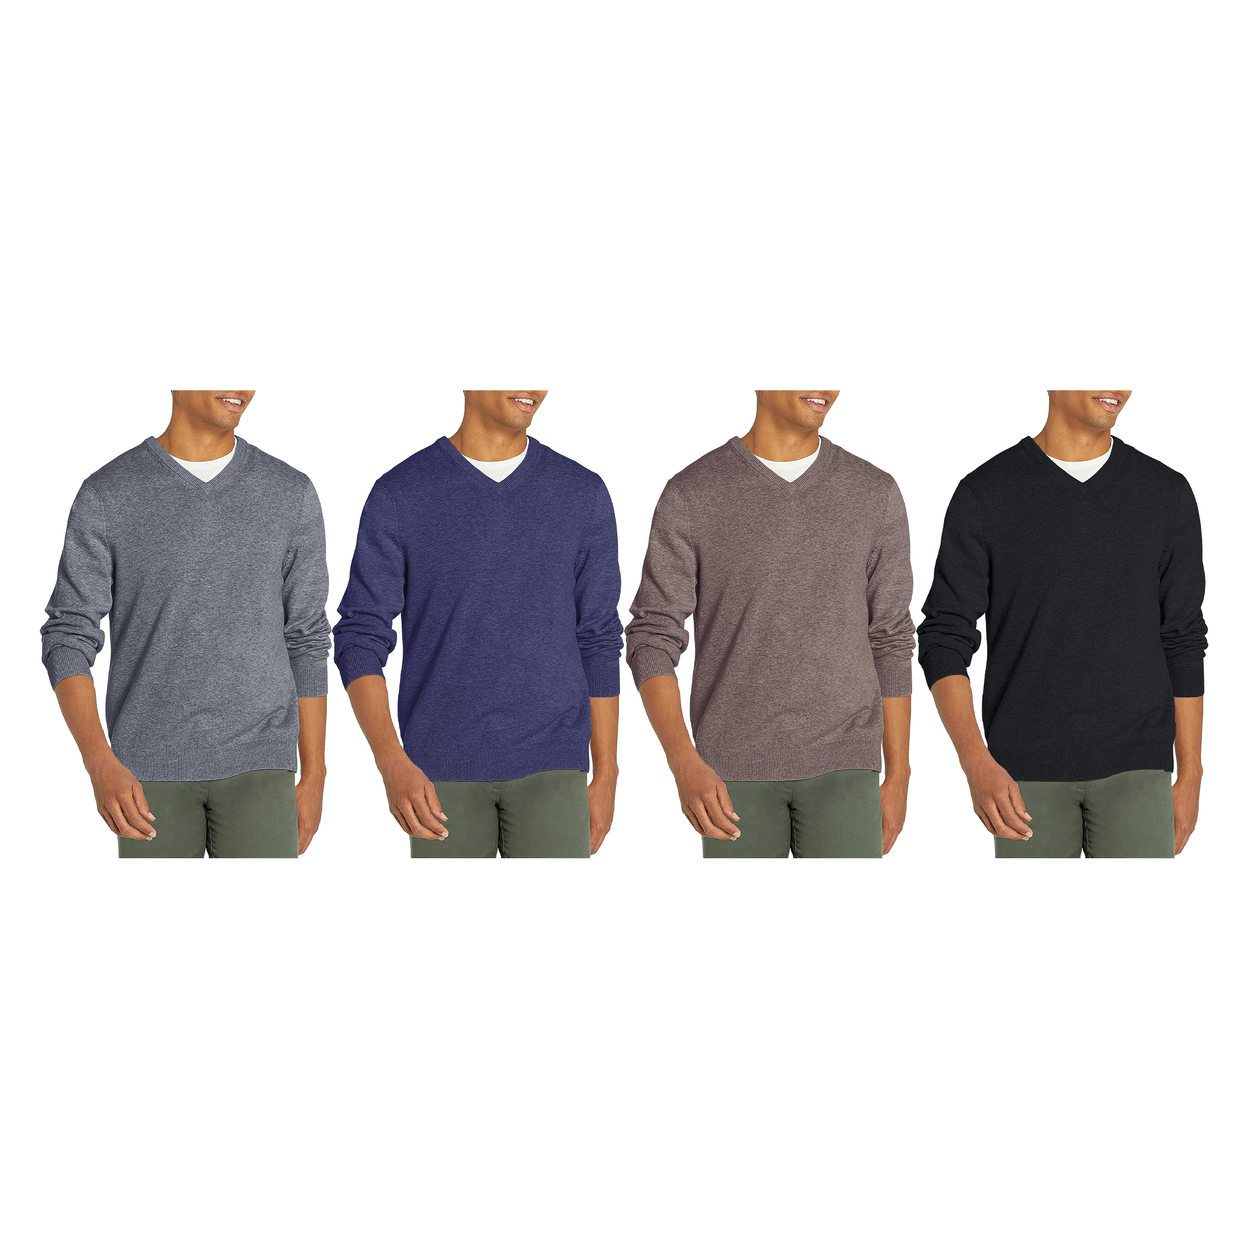 2-Pack: Men's Casual Ultra Soft Slim Fit Warm Knit V-Neck Sweater - Black & Grey, Small